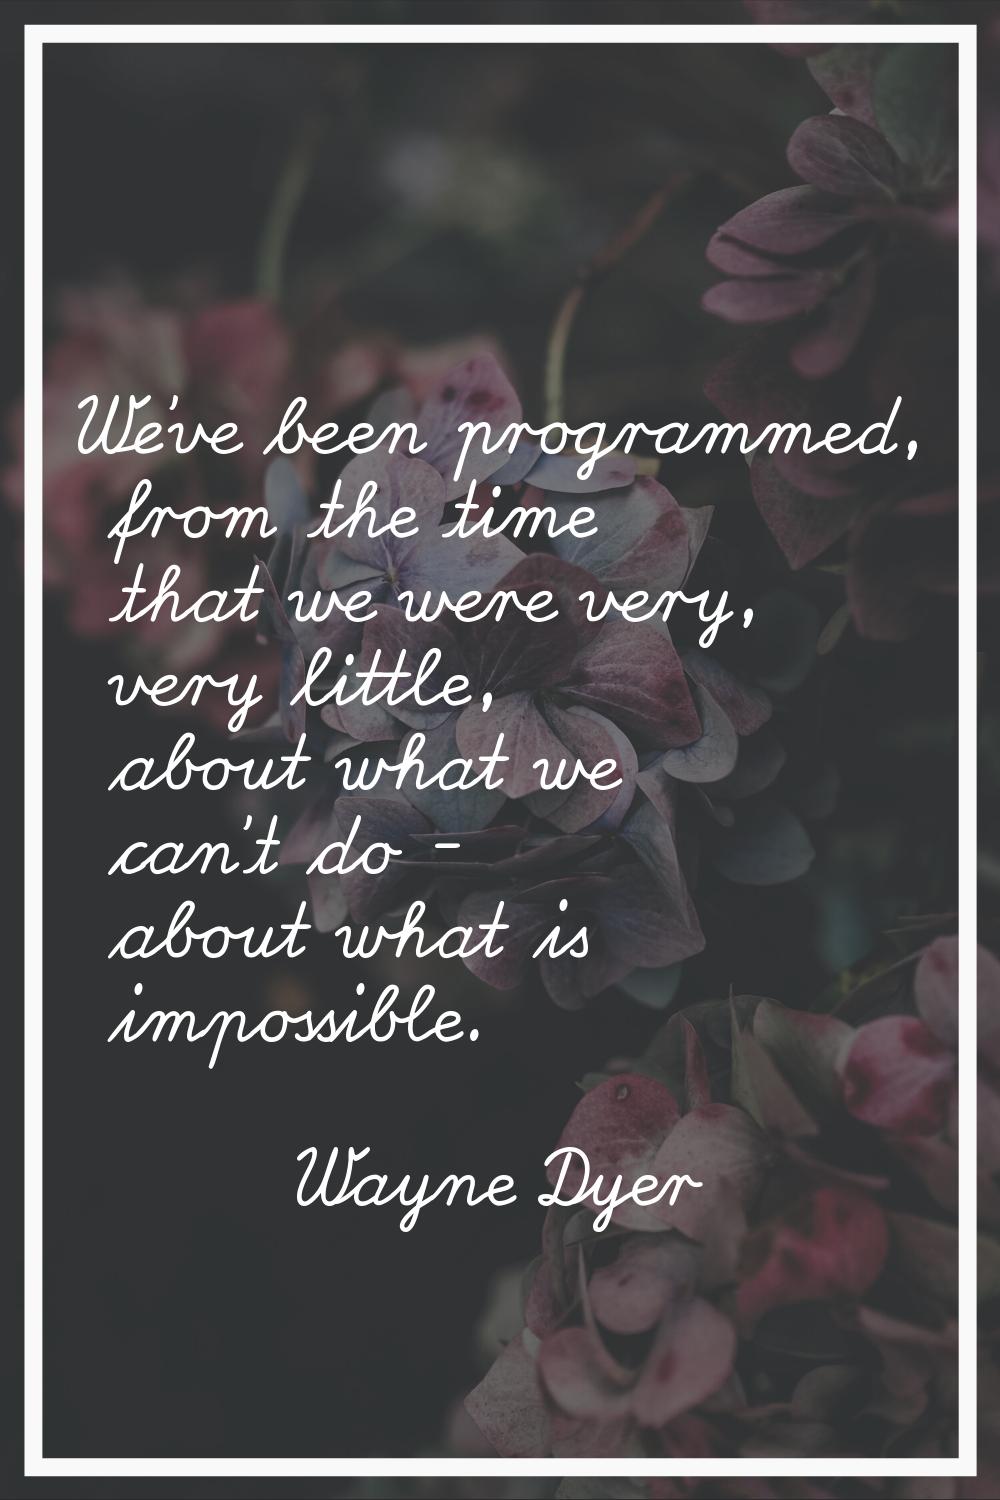 We've been programmed, from the time that we were very, very little, about what we can't do - about